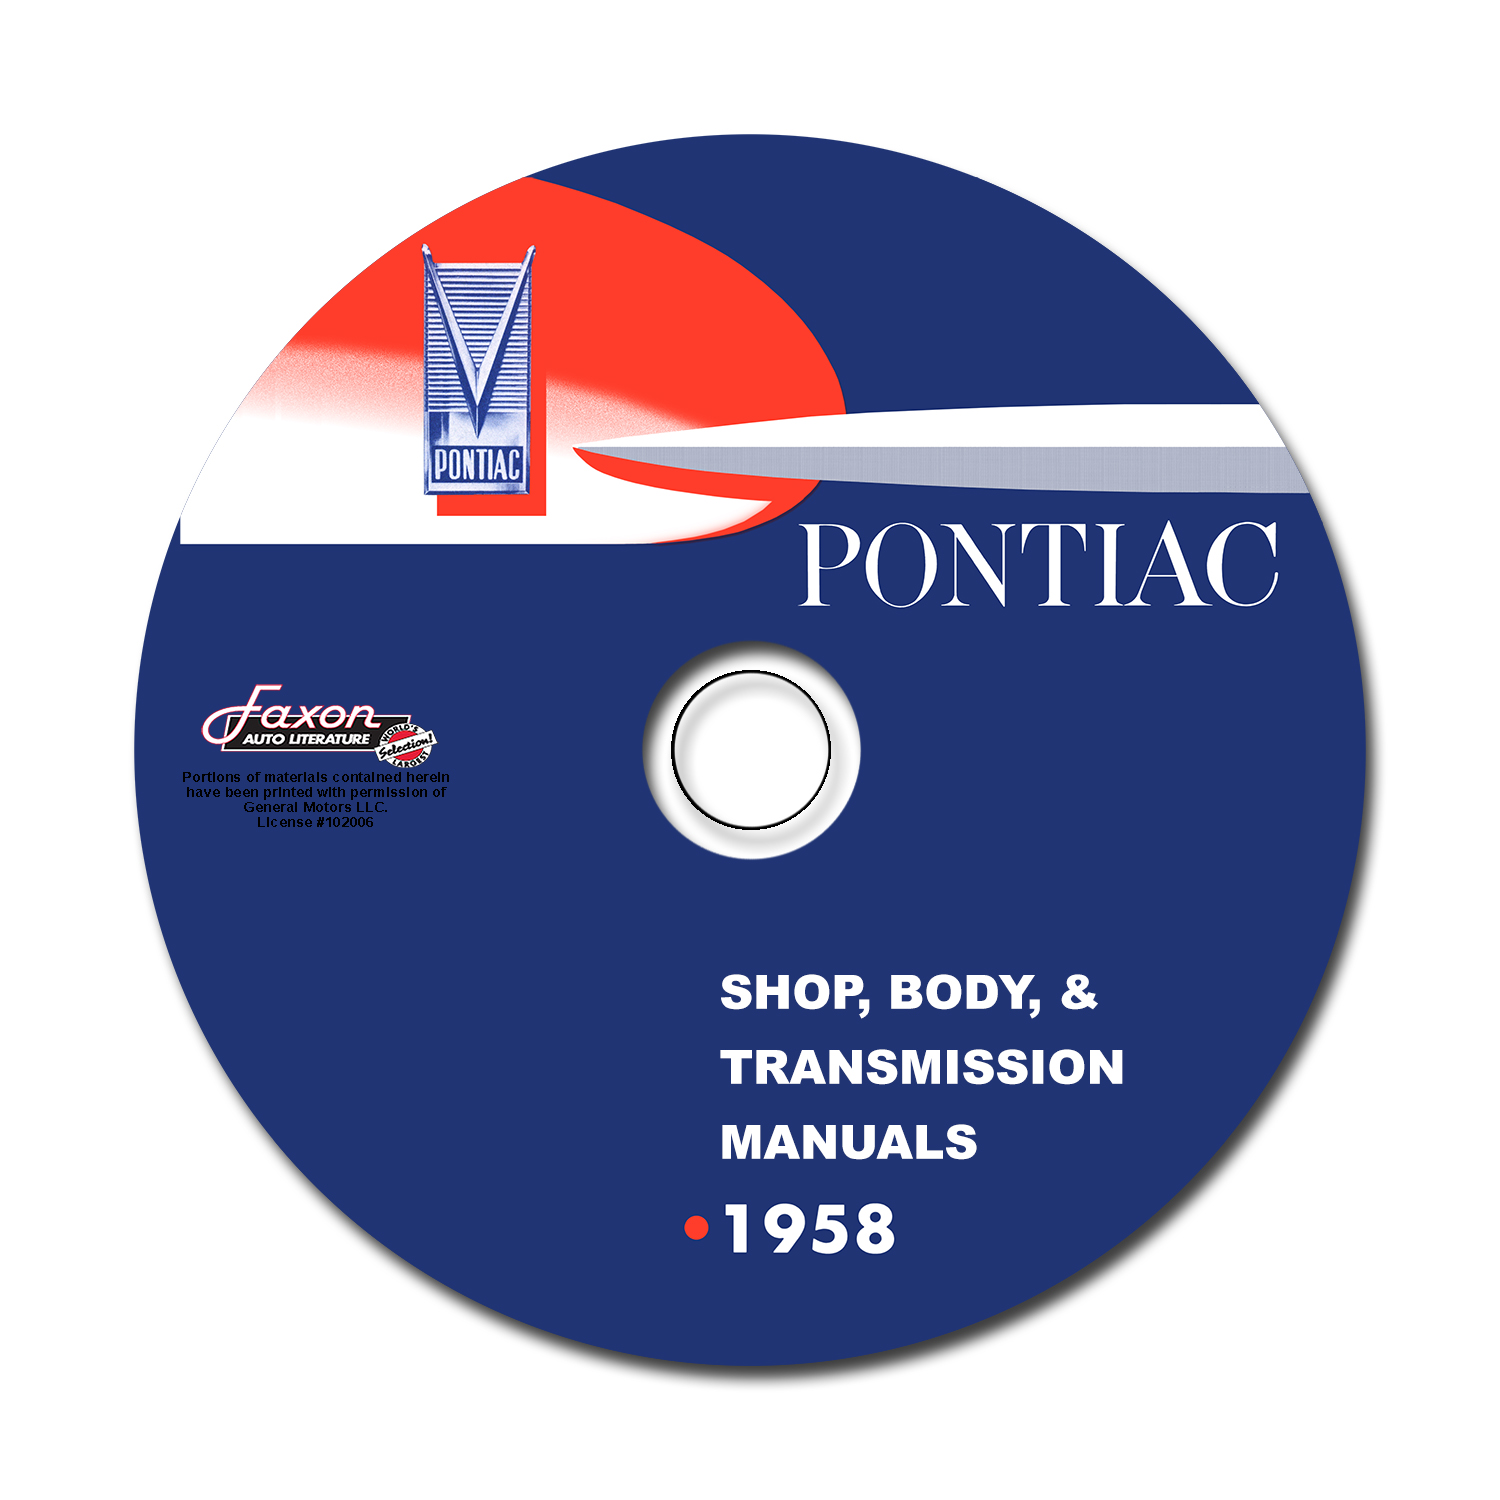 1958 Pontiac CD Shop Manual with Body, A/C, & Fuel Injection Manuals